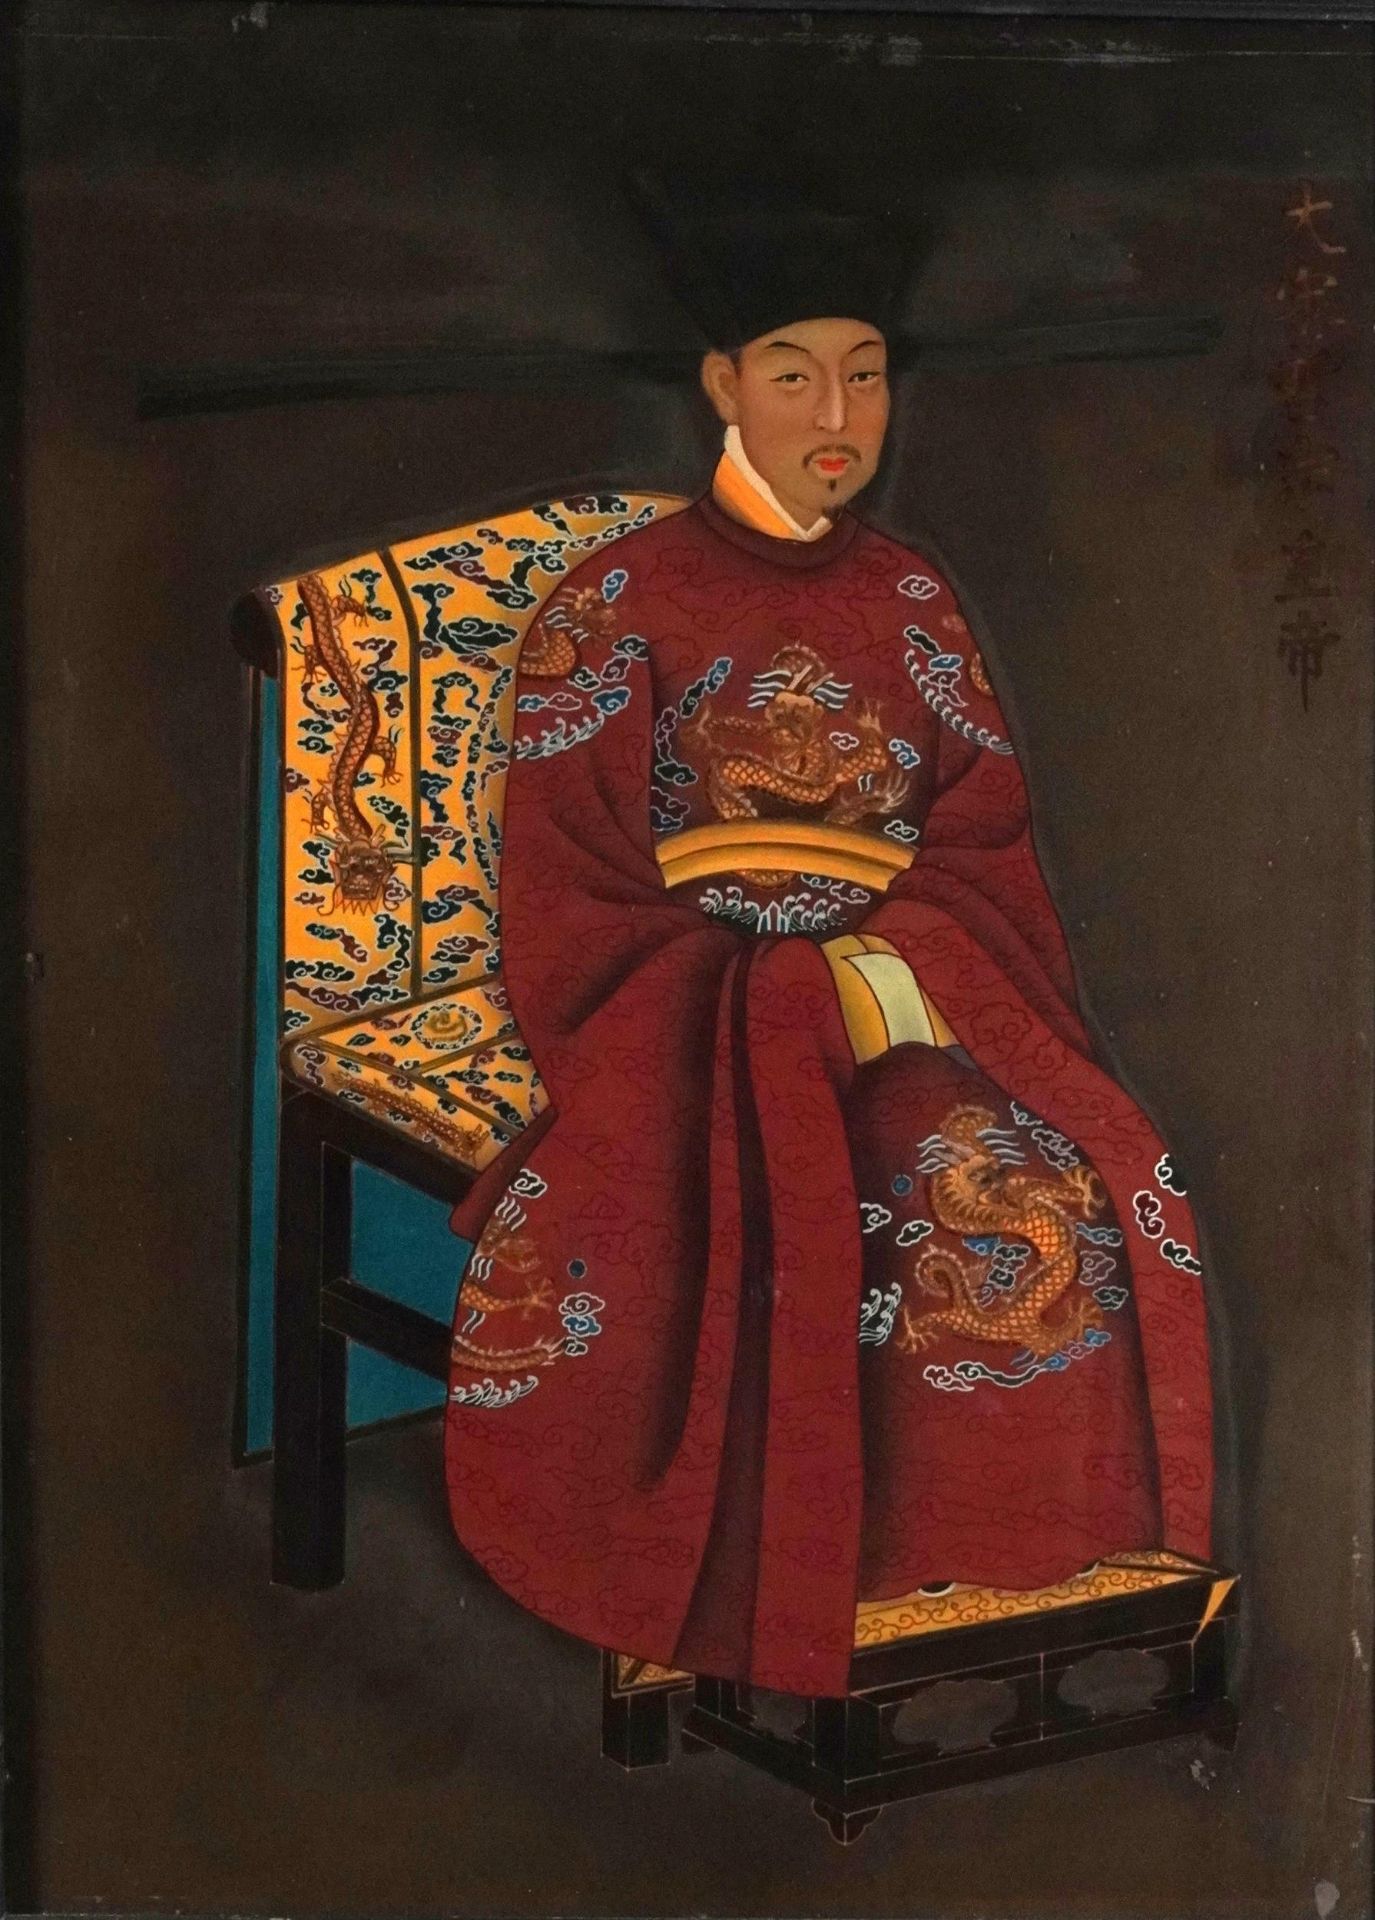 Ancestral portrait of a ruler, Chinese reverse glass painting with calligraphy housed in a